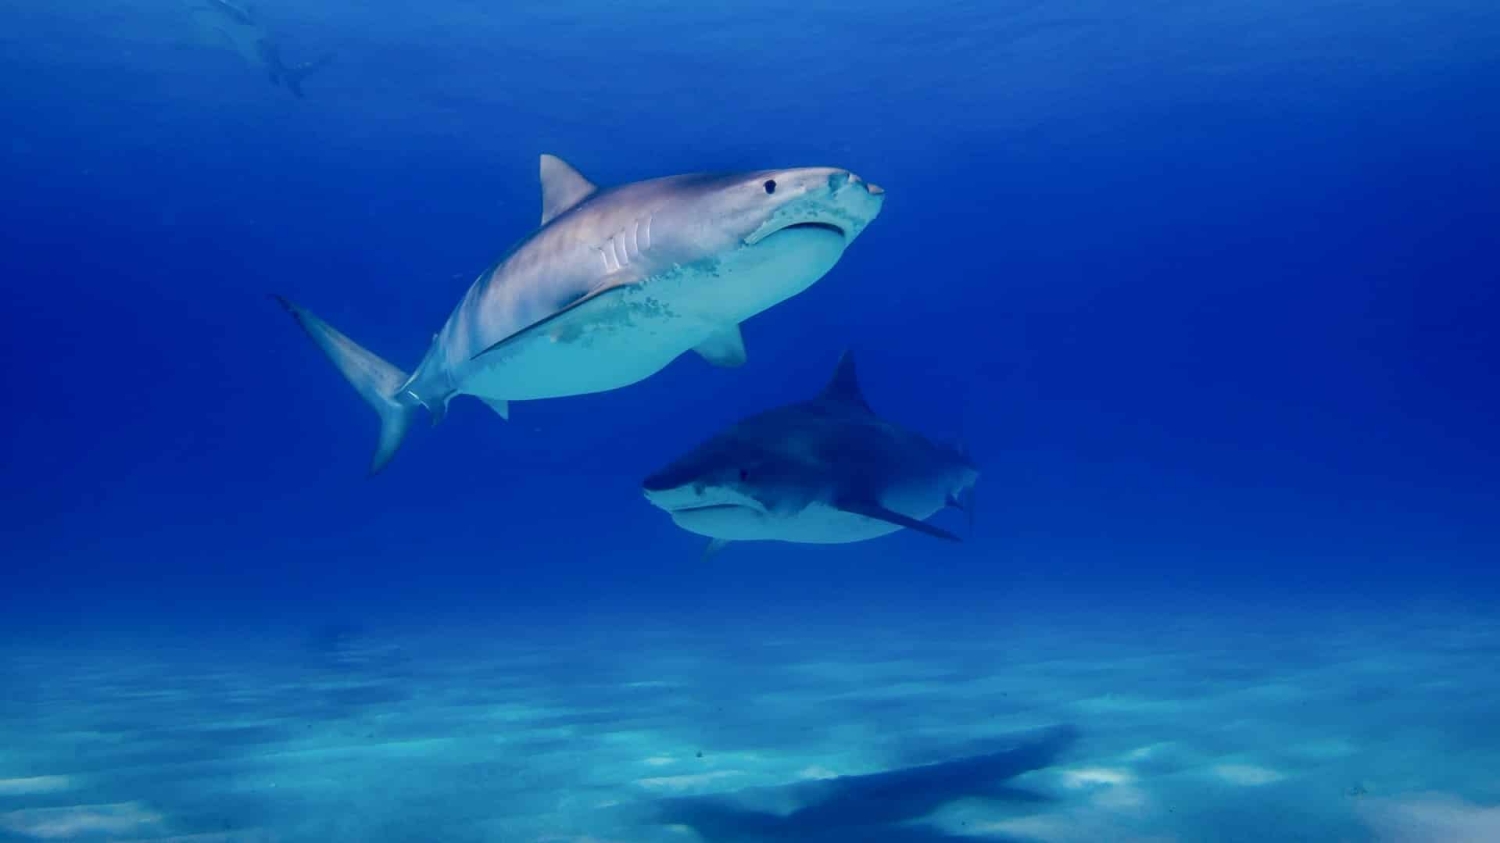 Sharks in the ocean - Positive YouTube Videos Help Deflect Blame From Sharks - College of Natural Resources NC State University